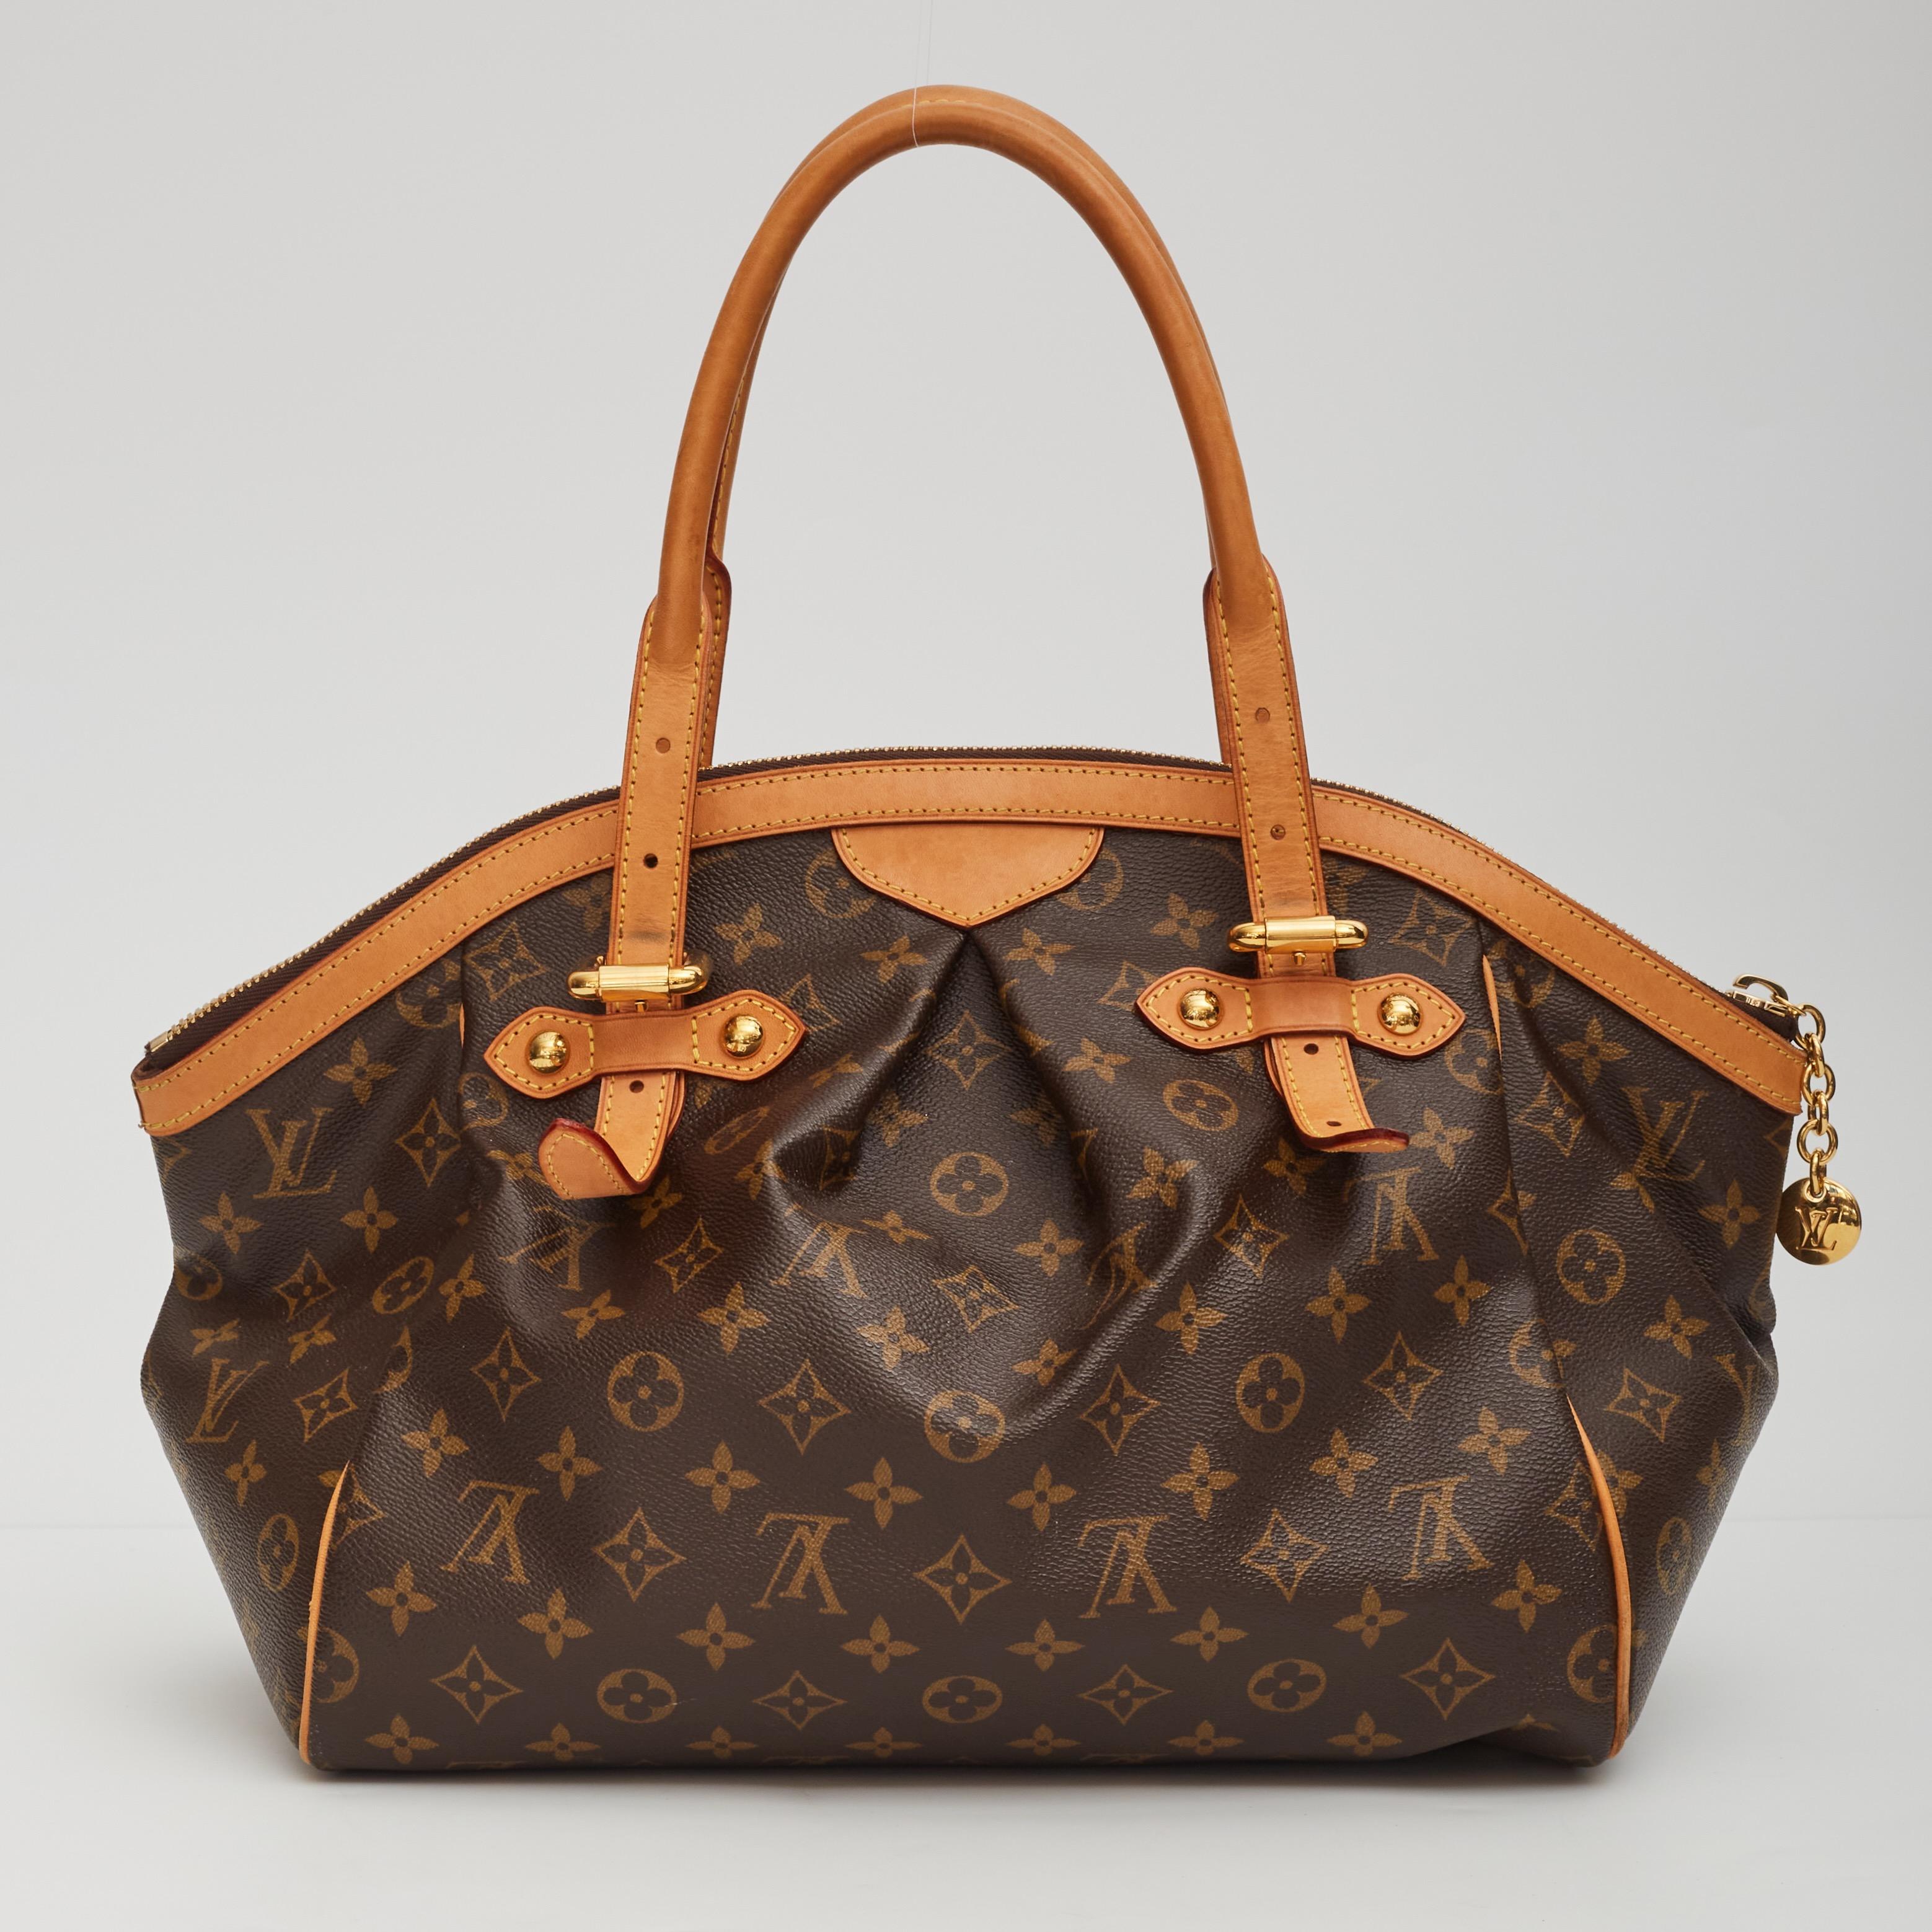 This luxurious Tivoli tote in the largest size is constructed of pleated Louis Vuitton monogram on toile canvas. The bag features signature natural vachetta leather trim including dual tall rolled top handles, and polished brass hardware including